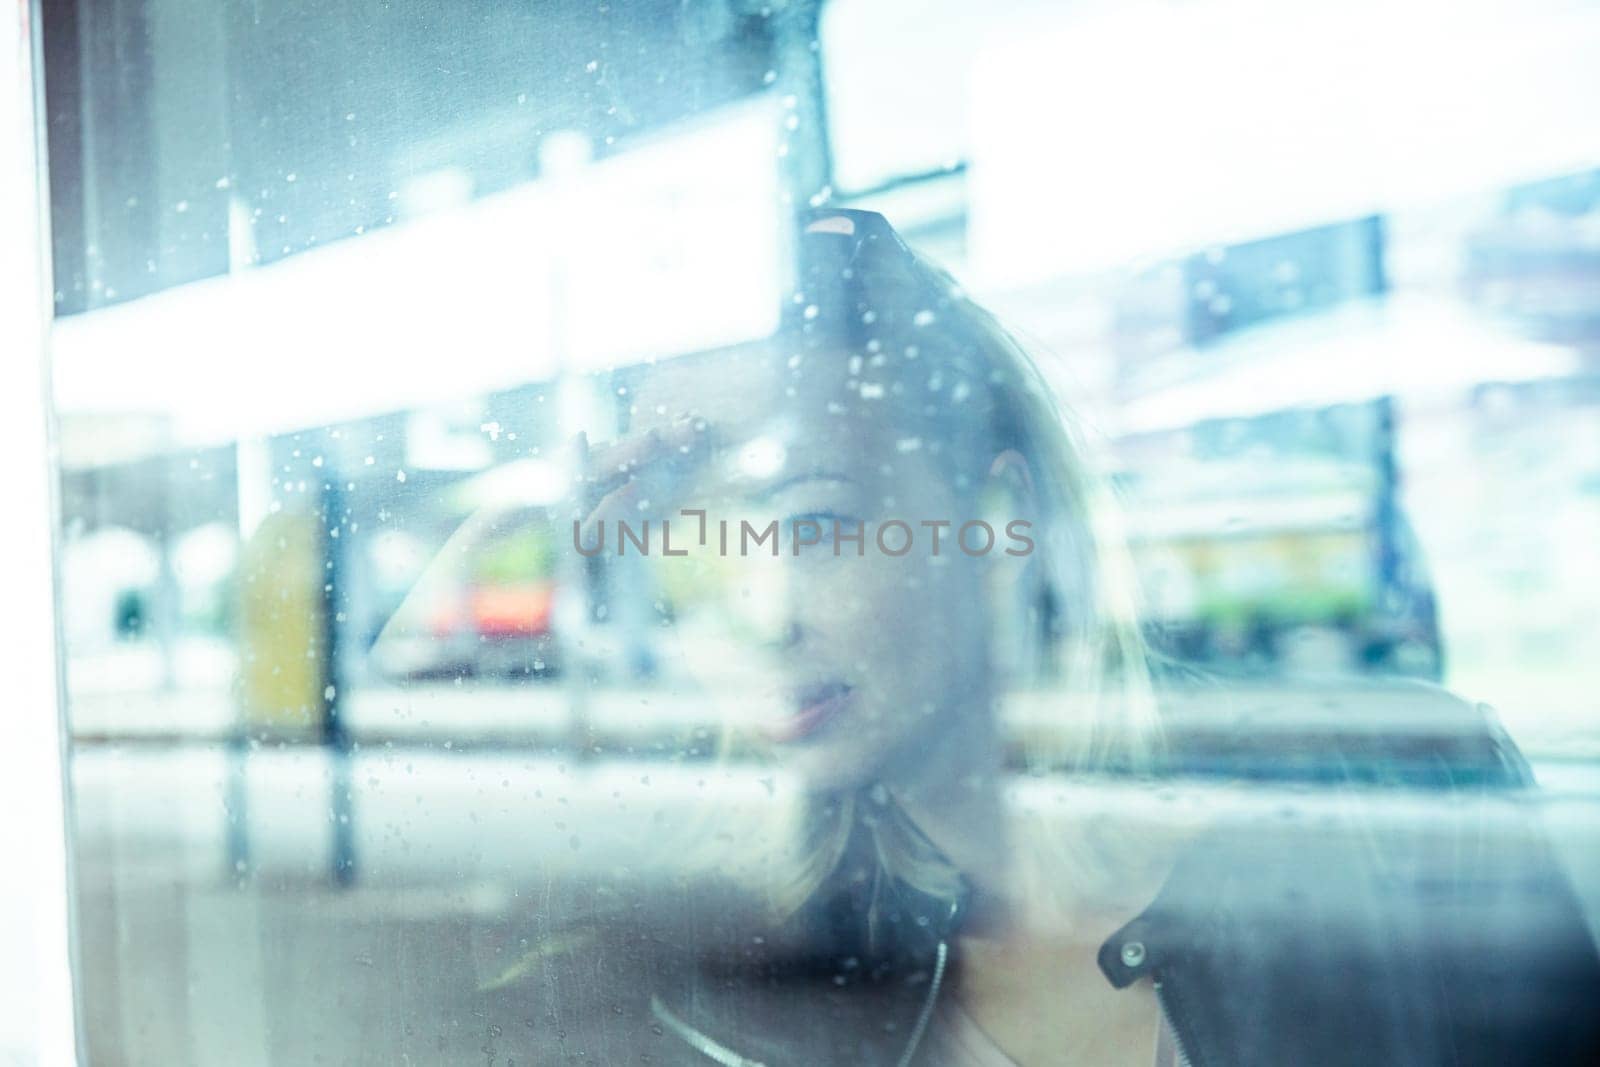 Woman traveler contemplating outdoor view from window of train. Young lady on commute travel to work sitting in bus or train